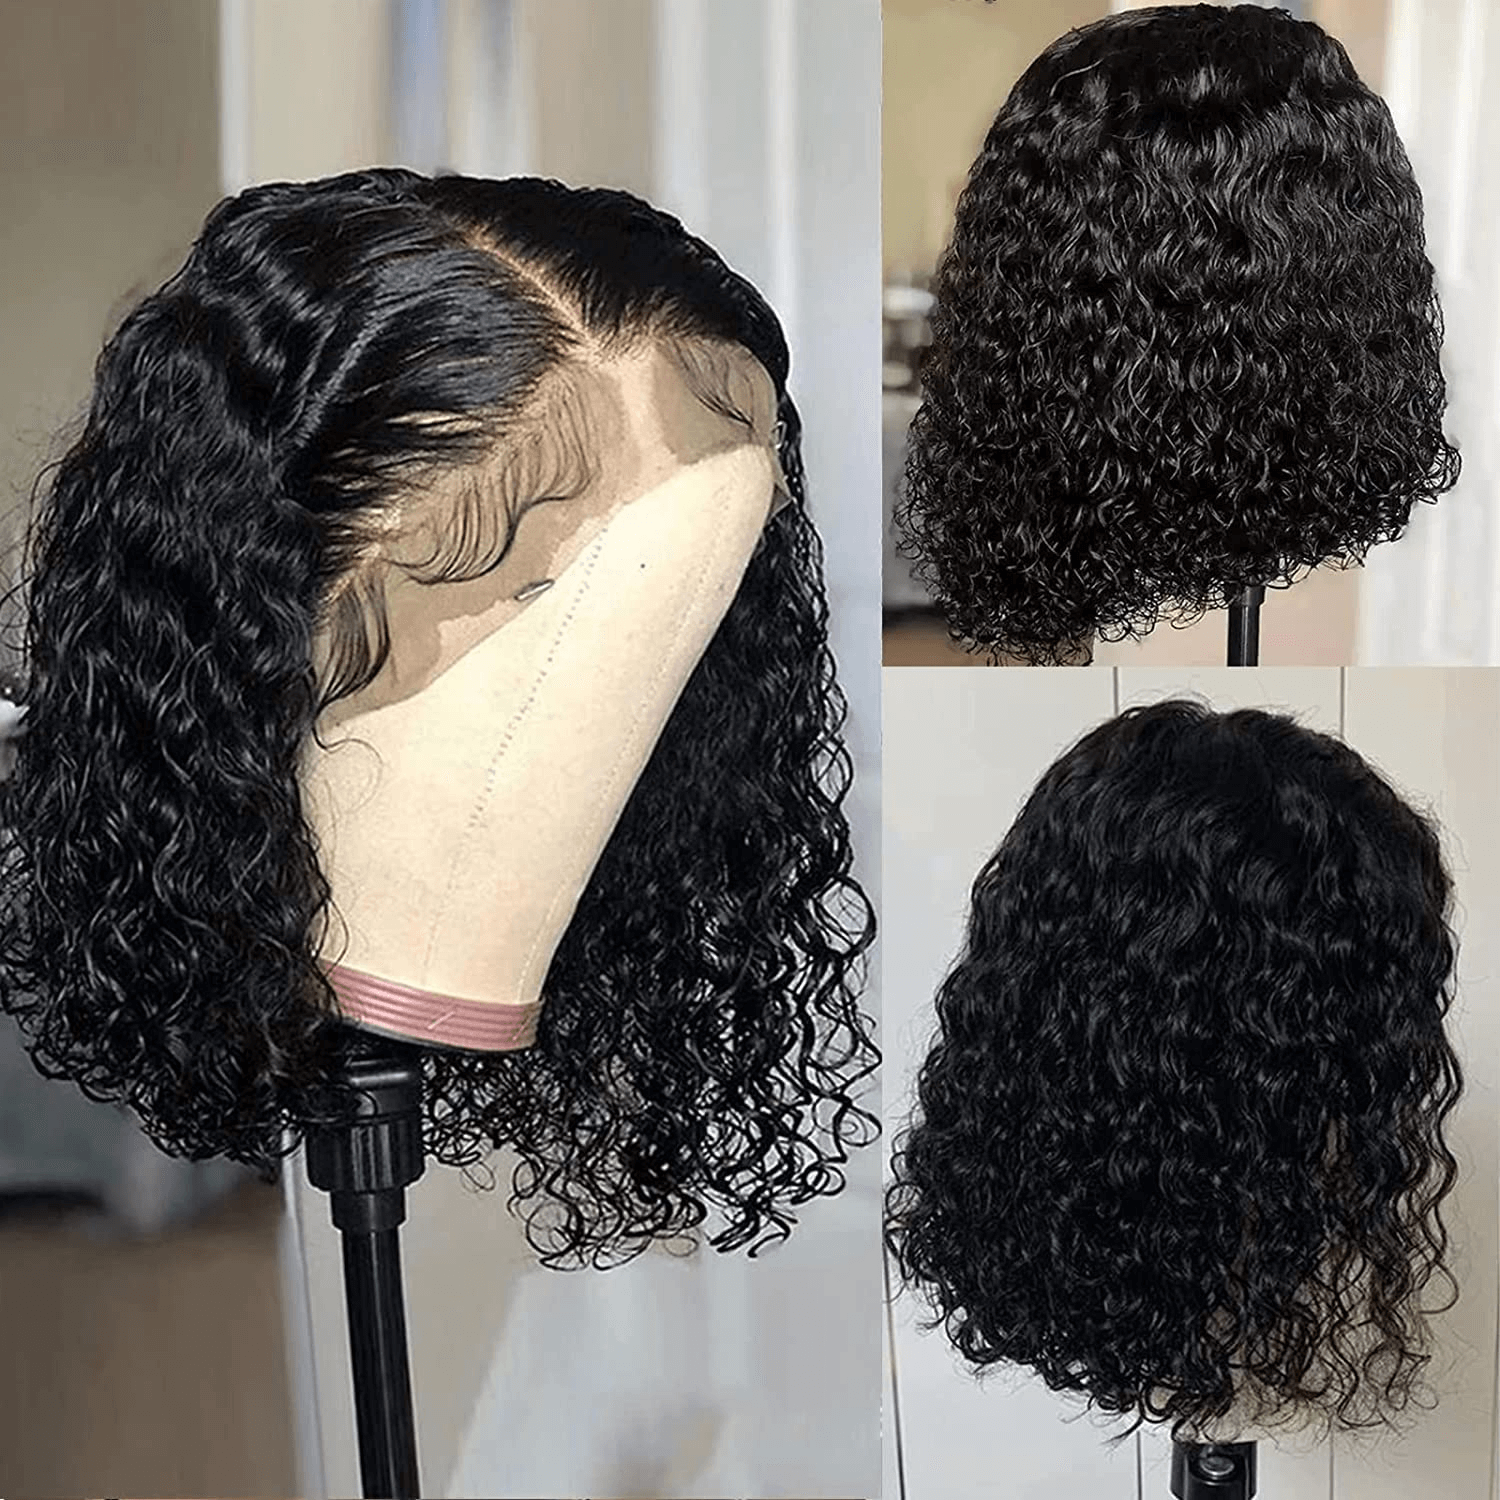 Wesface Curly Full Lace Front Wig Human Hair Bob Wig Human Hair Full Lace Frontal Wig Curly Bob Wigs For Black Women Glueless Deep Curly Bob Wig Human Hair Pre Plucked